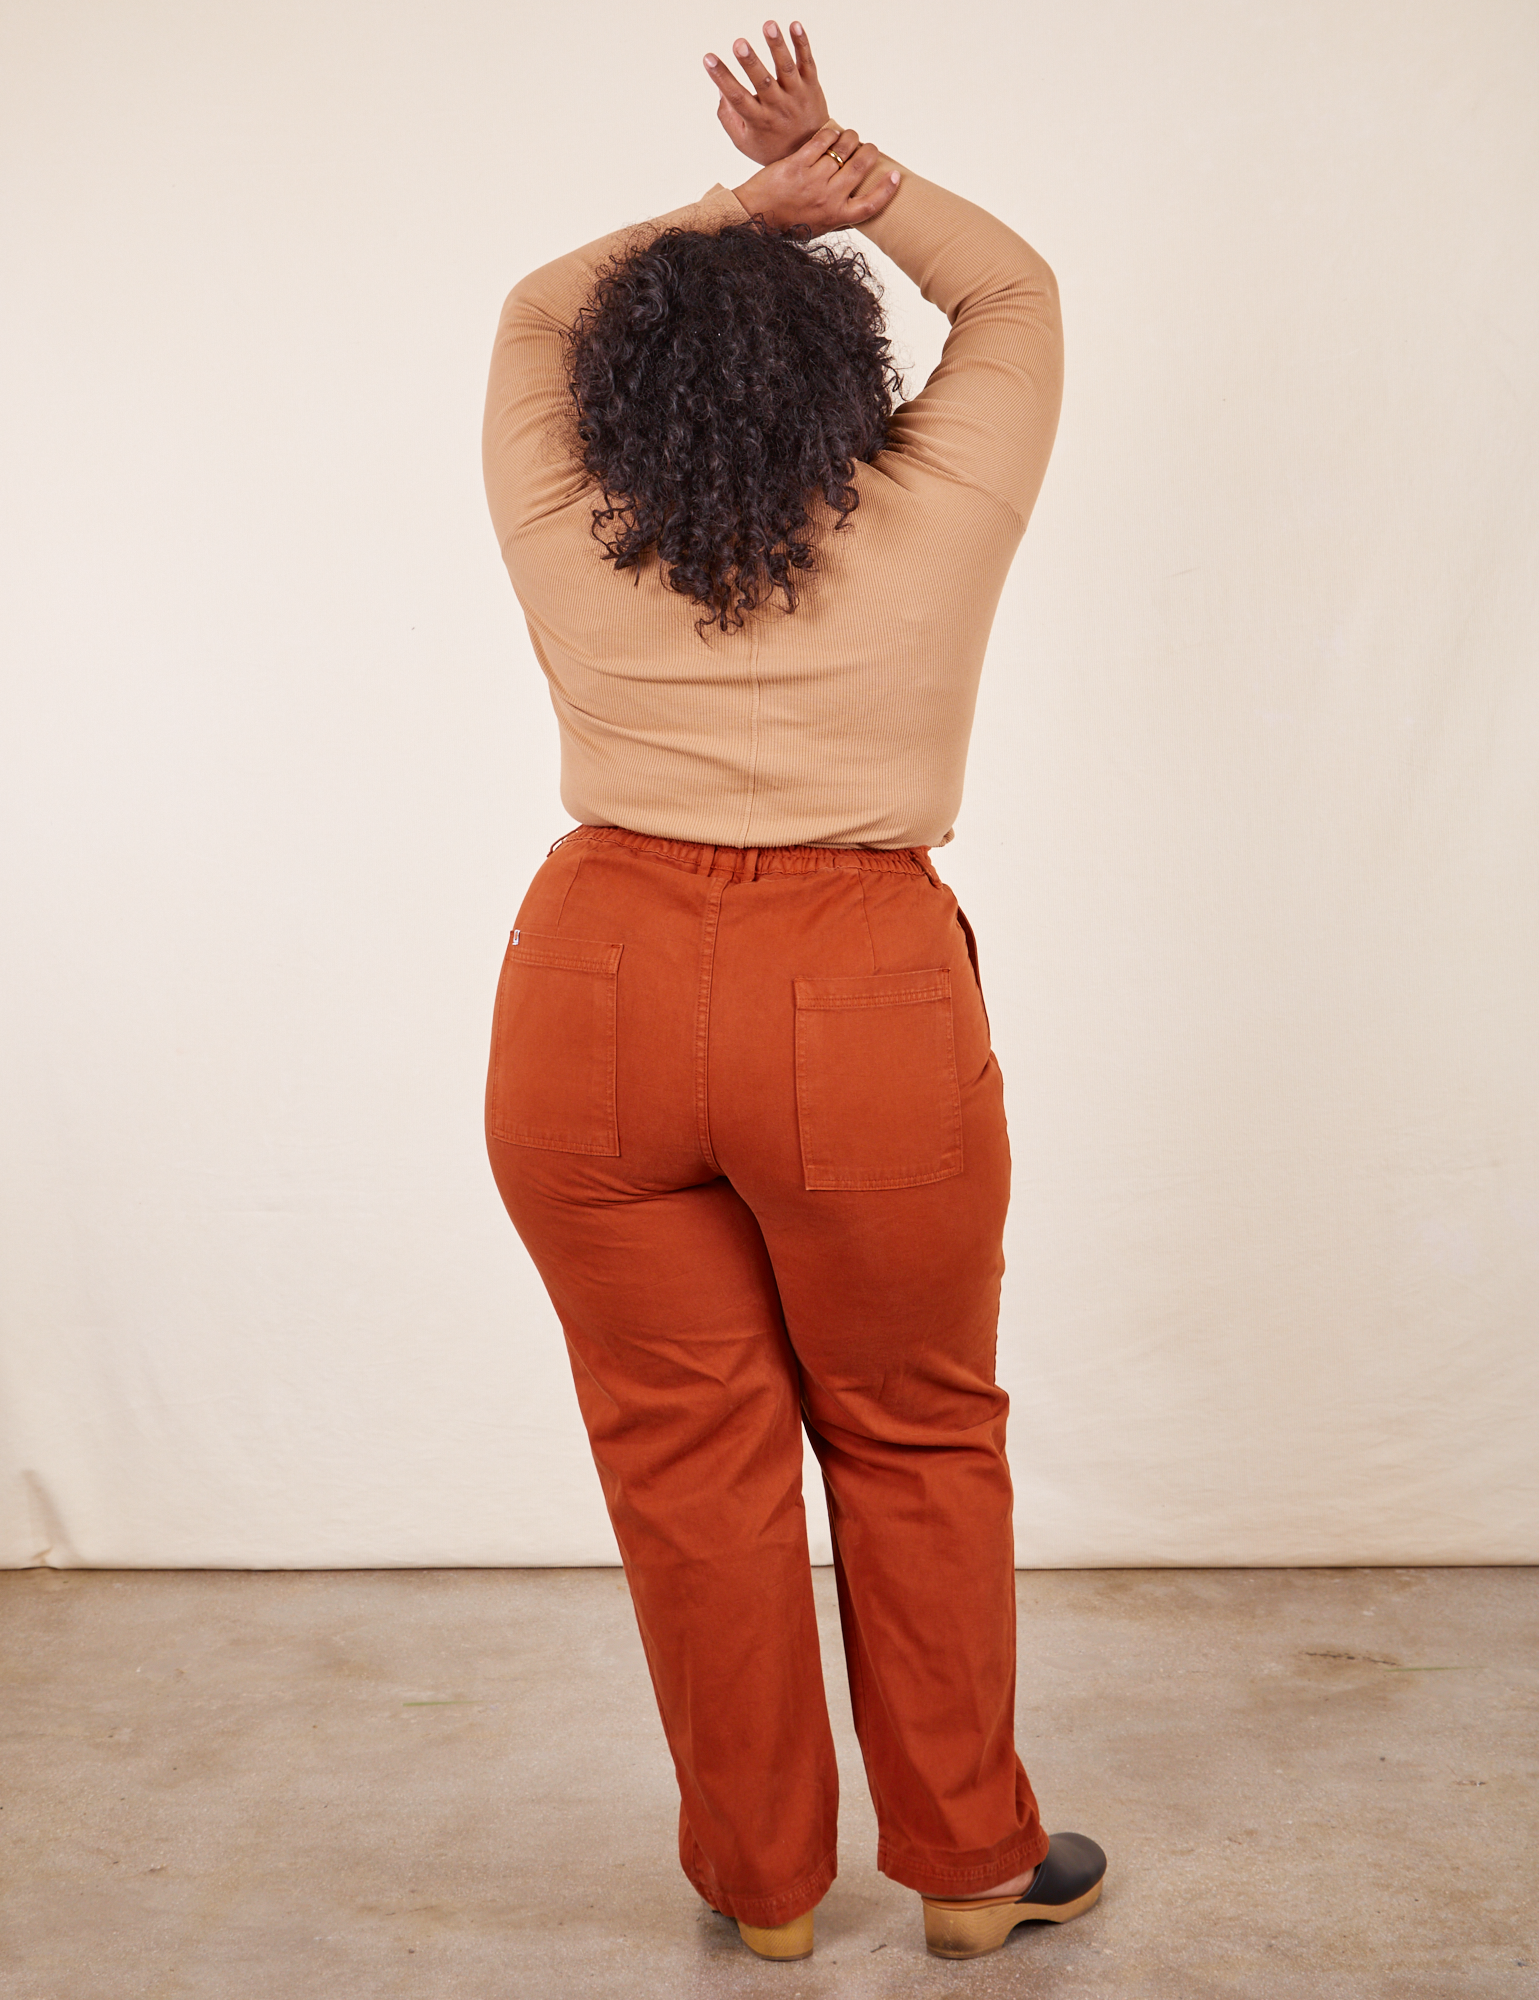 Back view of Work Pants in Burnt Terracotta and tan Wrap Top on Morgan